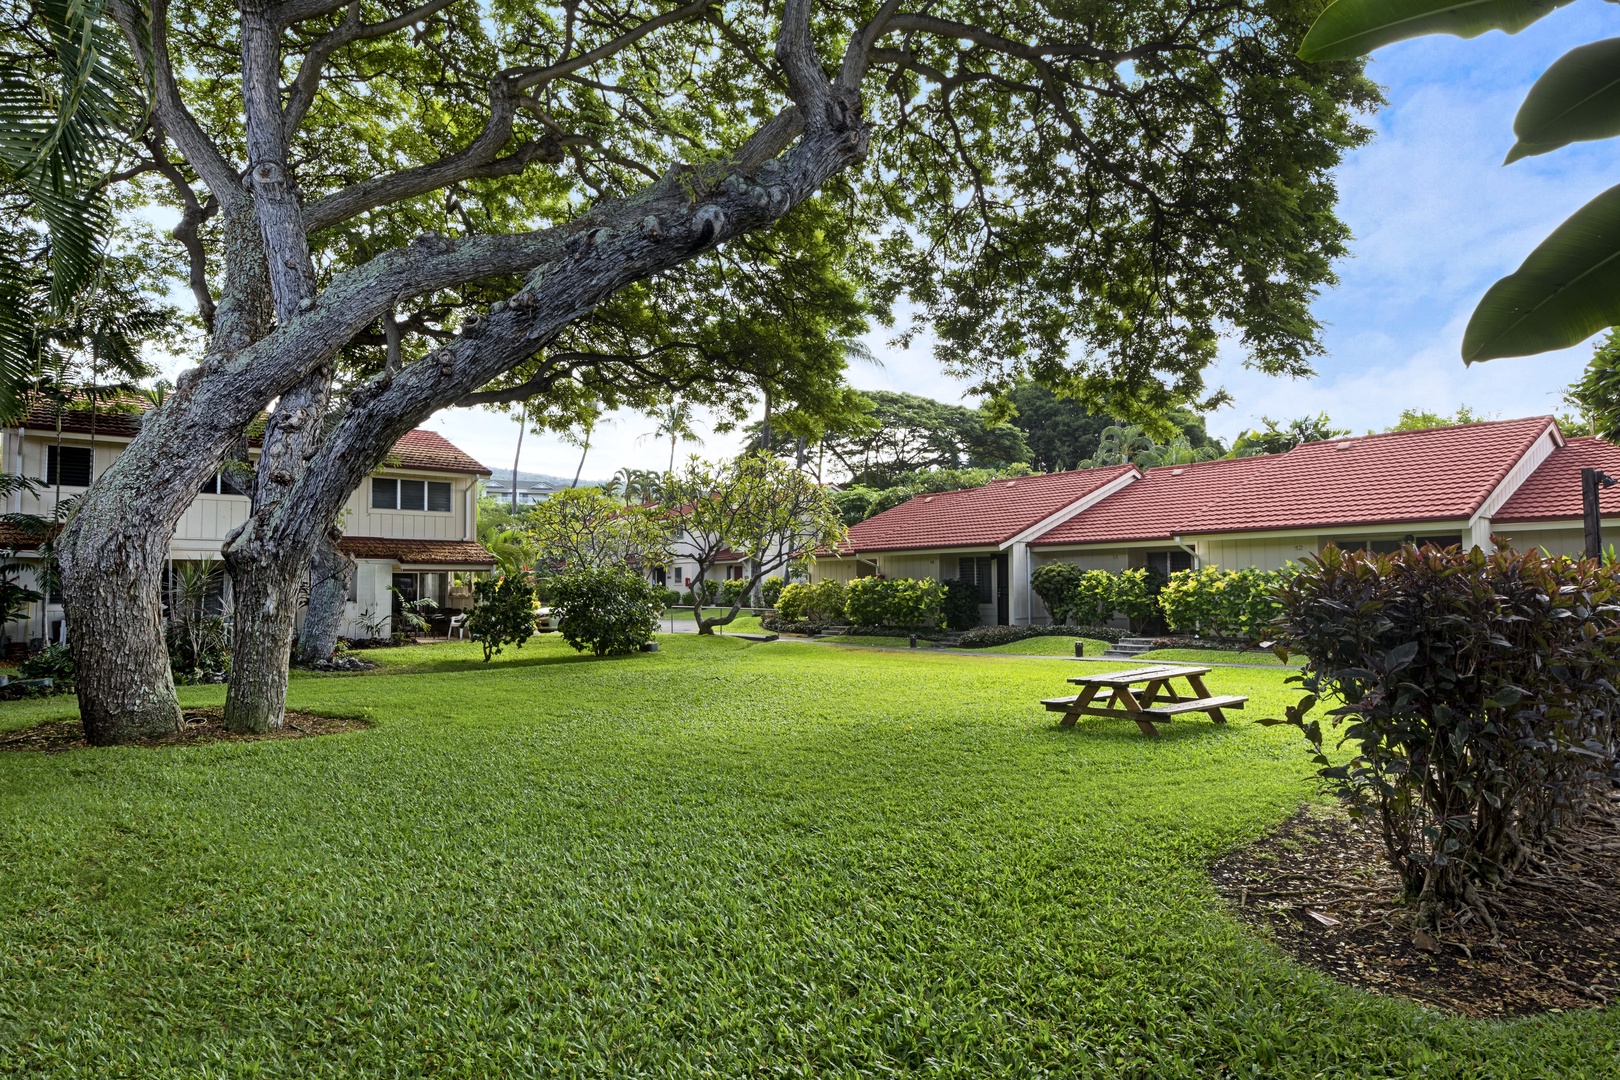 Kailua Kona Vacation Rentals, Keauhou Kona Surf & Racquet 2101 - njoy a serene picnic surrounded by lush greenery in our beautifully manicured grass front.